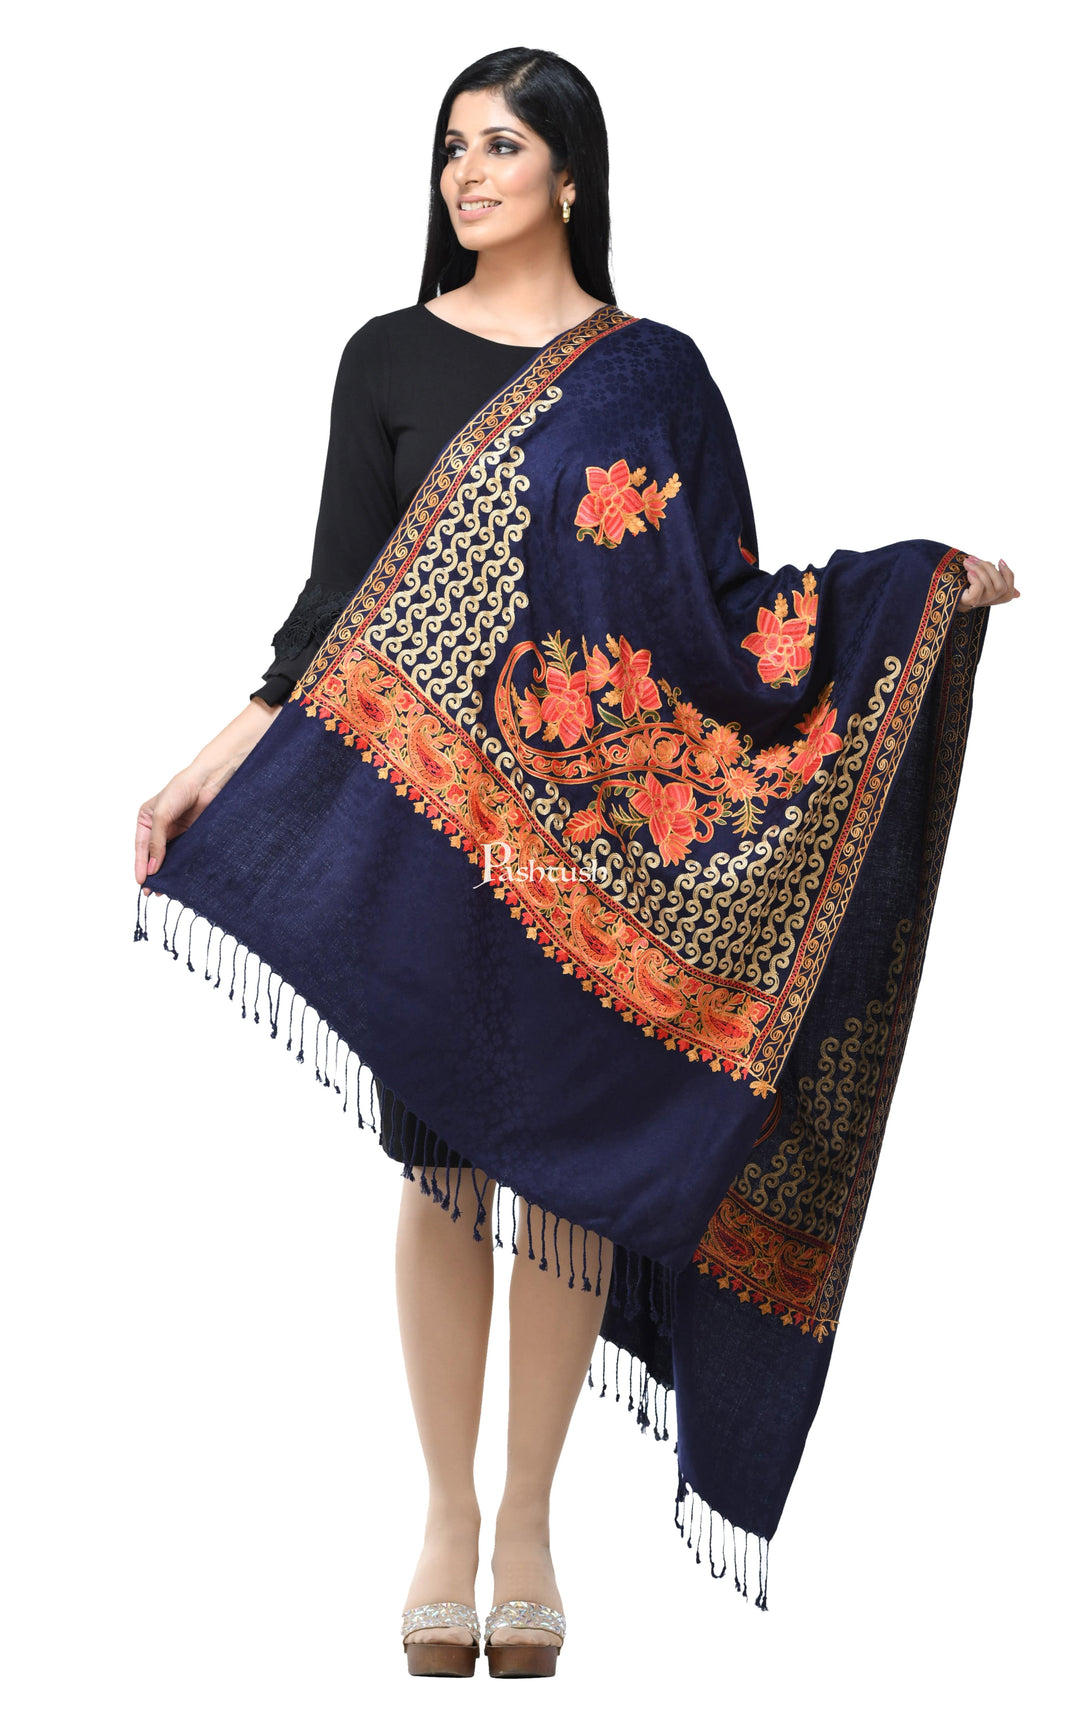 Pashwool Womens Stoles and Scarves Scarf Pashwool, Womens Kashmiri Aari Embroidery Stole, Soft Bamboo Navy Blue